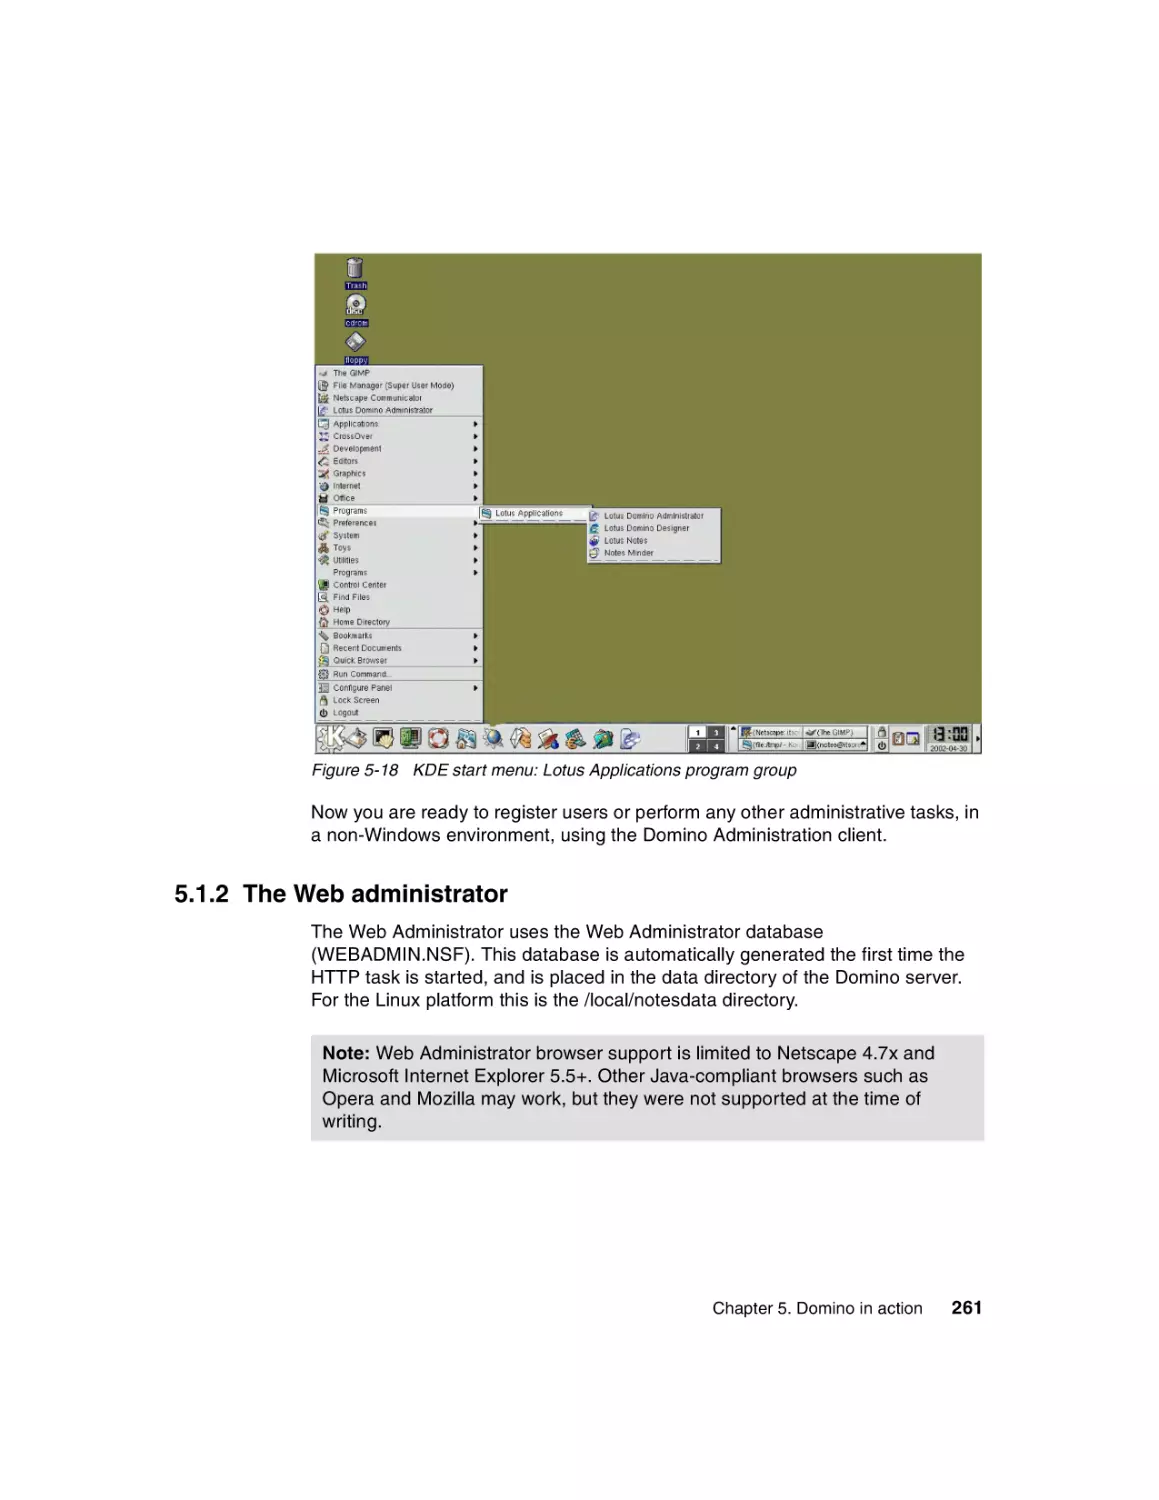 5.1.2 The Web administrator